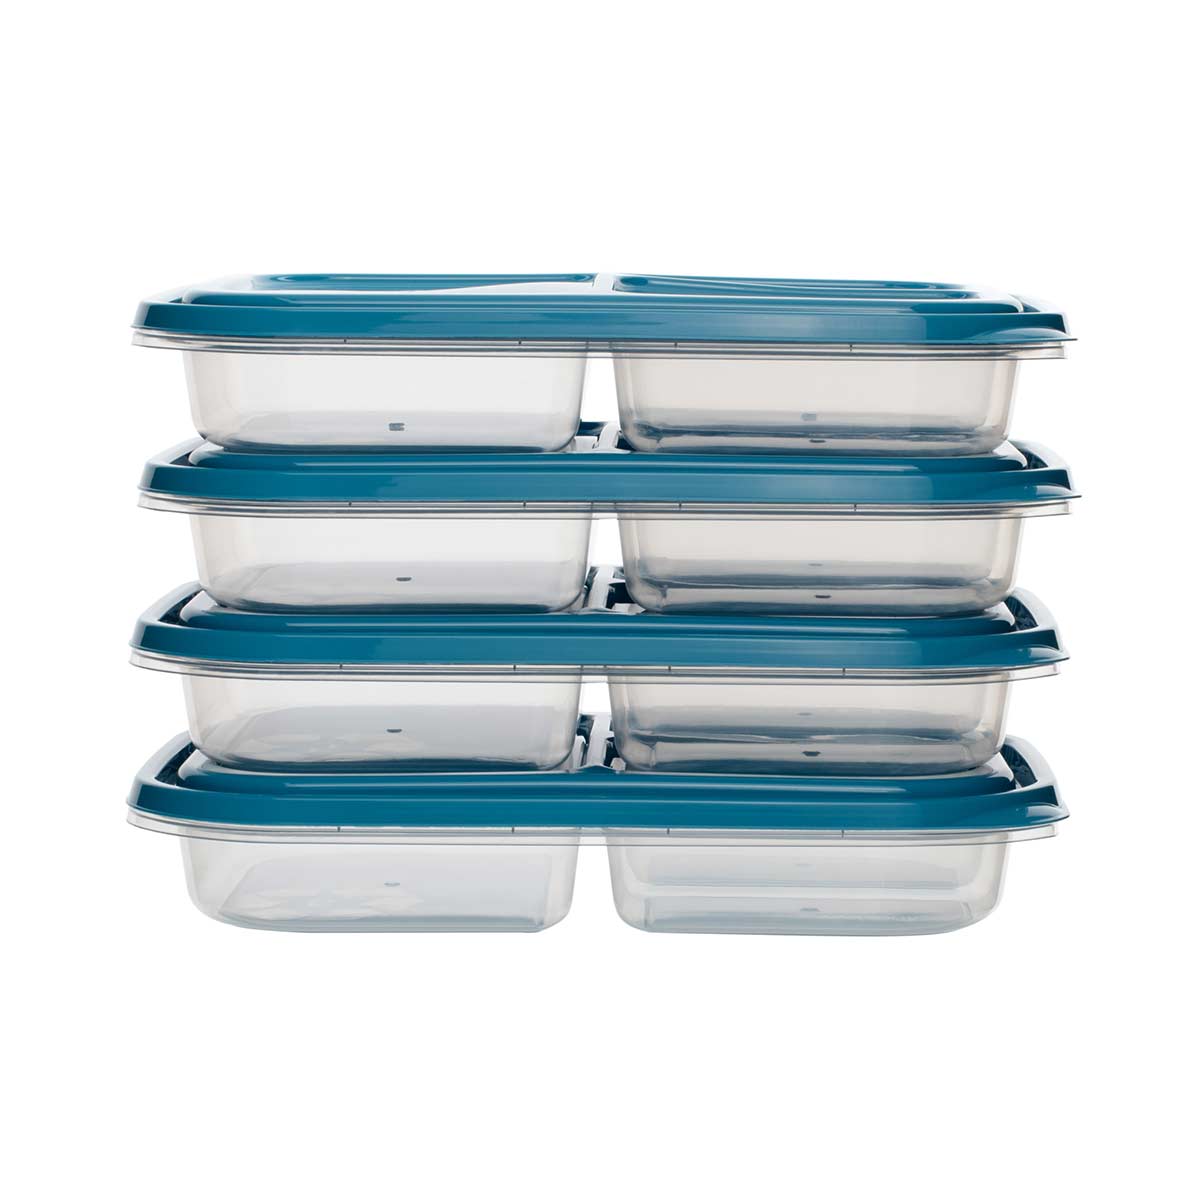 https://www.goodcook.com/media/catalog/product/g/o/goodcook-everyware-lunch-box-container-002.jpg?auto=webp&format=pjpg